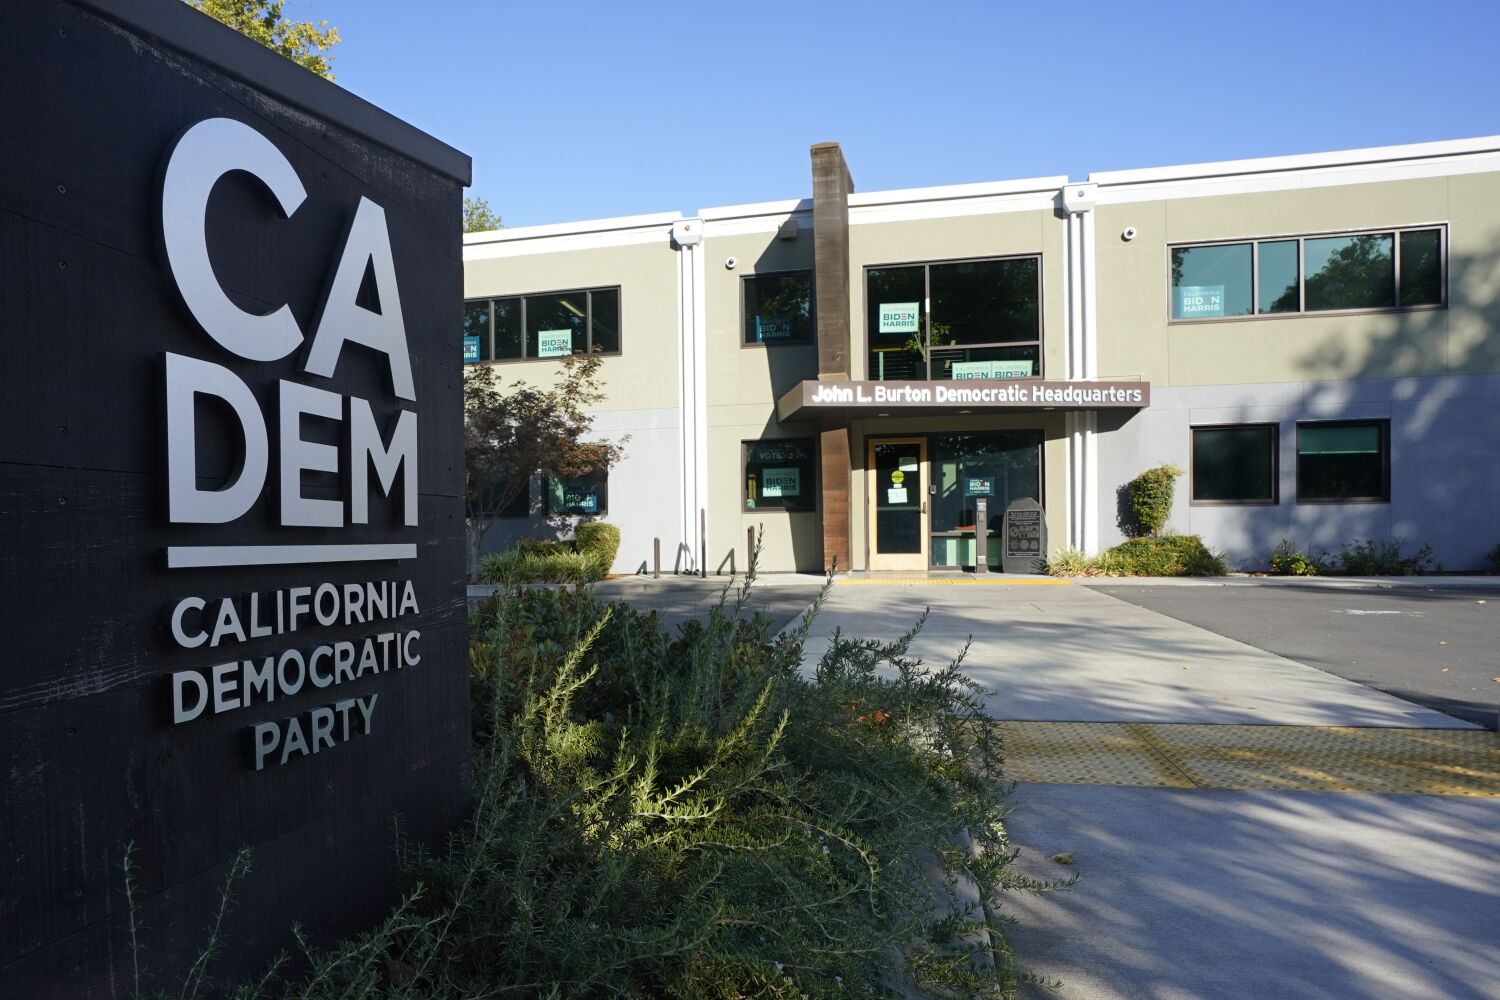 Two men who plotted to bomb California Democrats' headquarters sentenced to prison